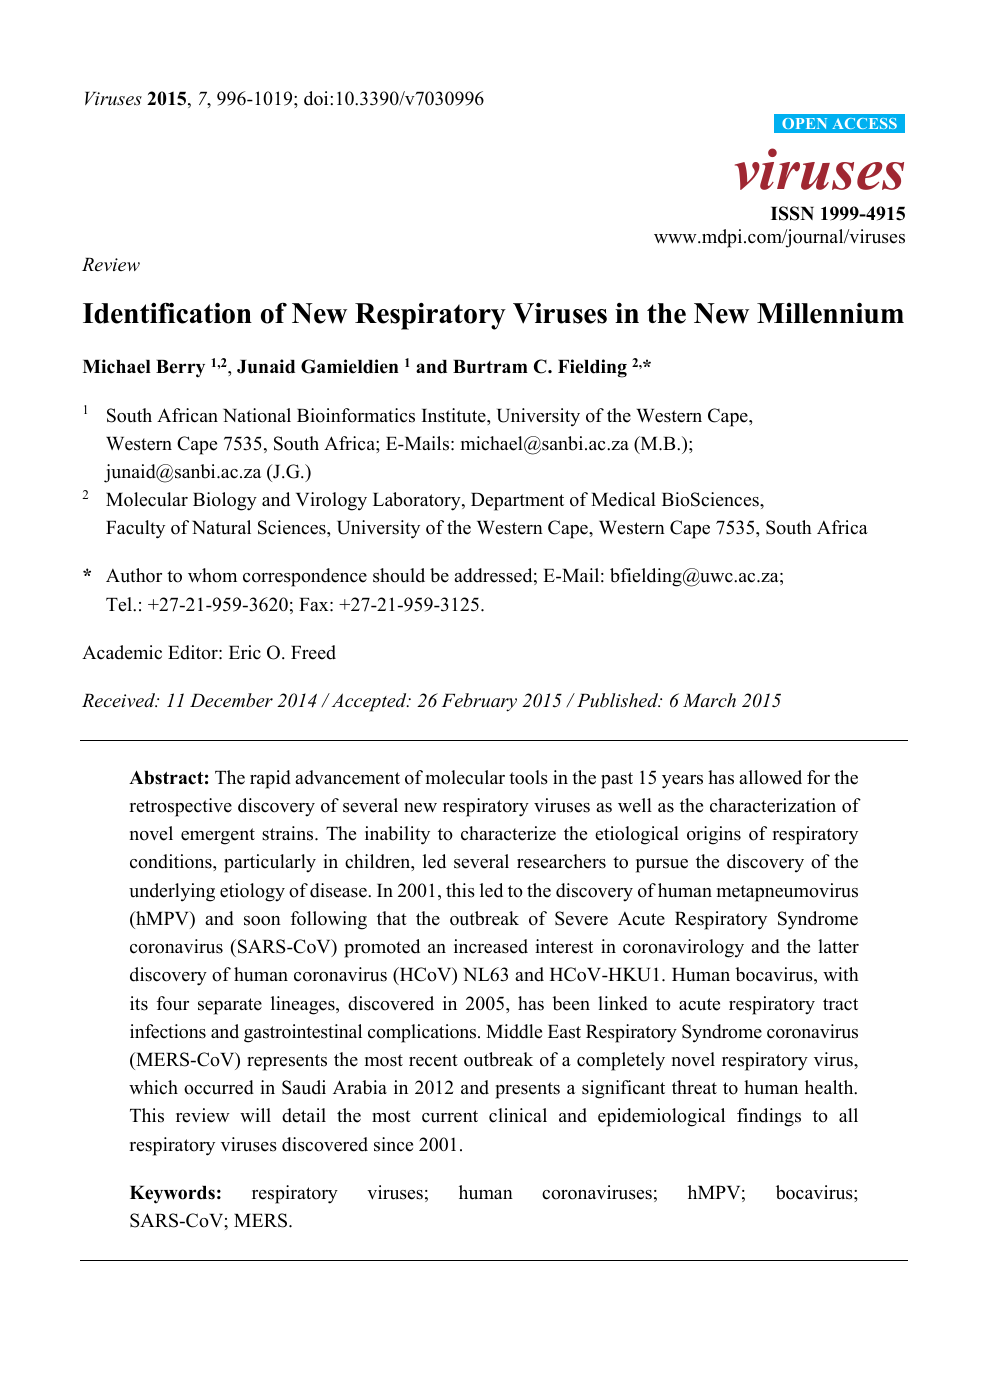 Identification Of New Respiratory Viruses In The New Millennium Topic Of Research Paper In Biological Sciences Download Scholarly Article Pdf And Read For Free On Cyberleninka Open Science Hub